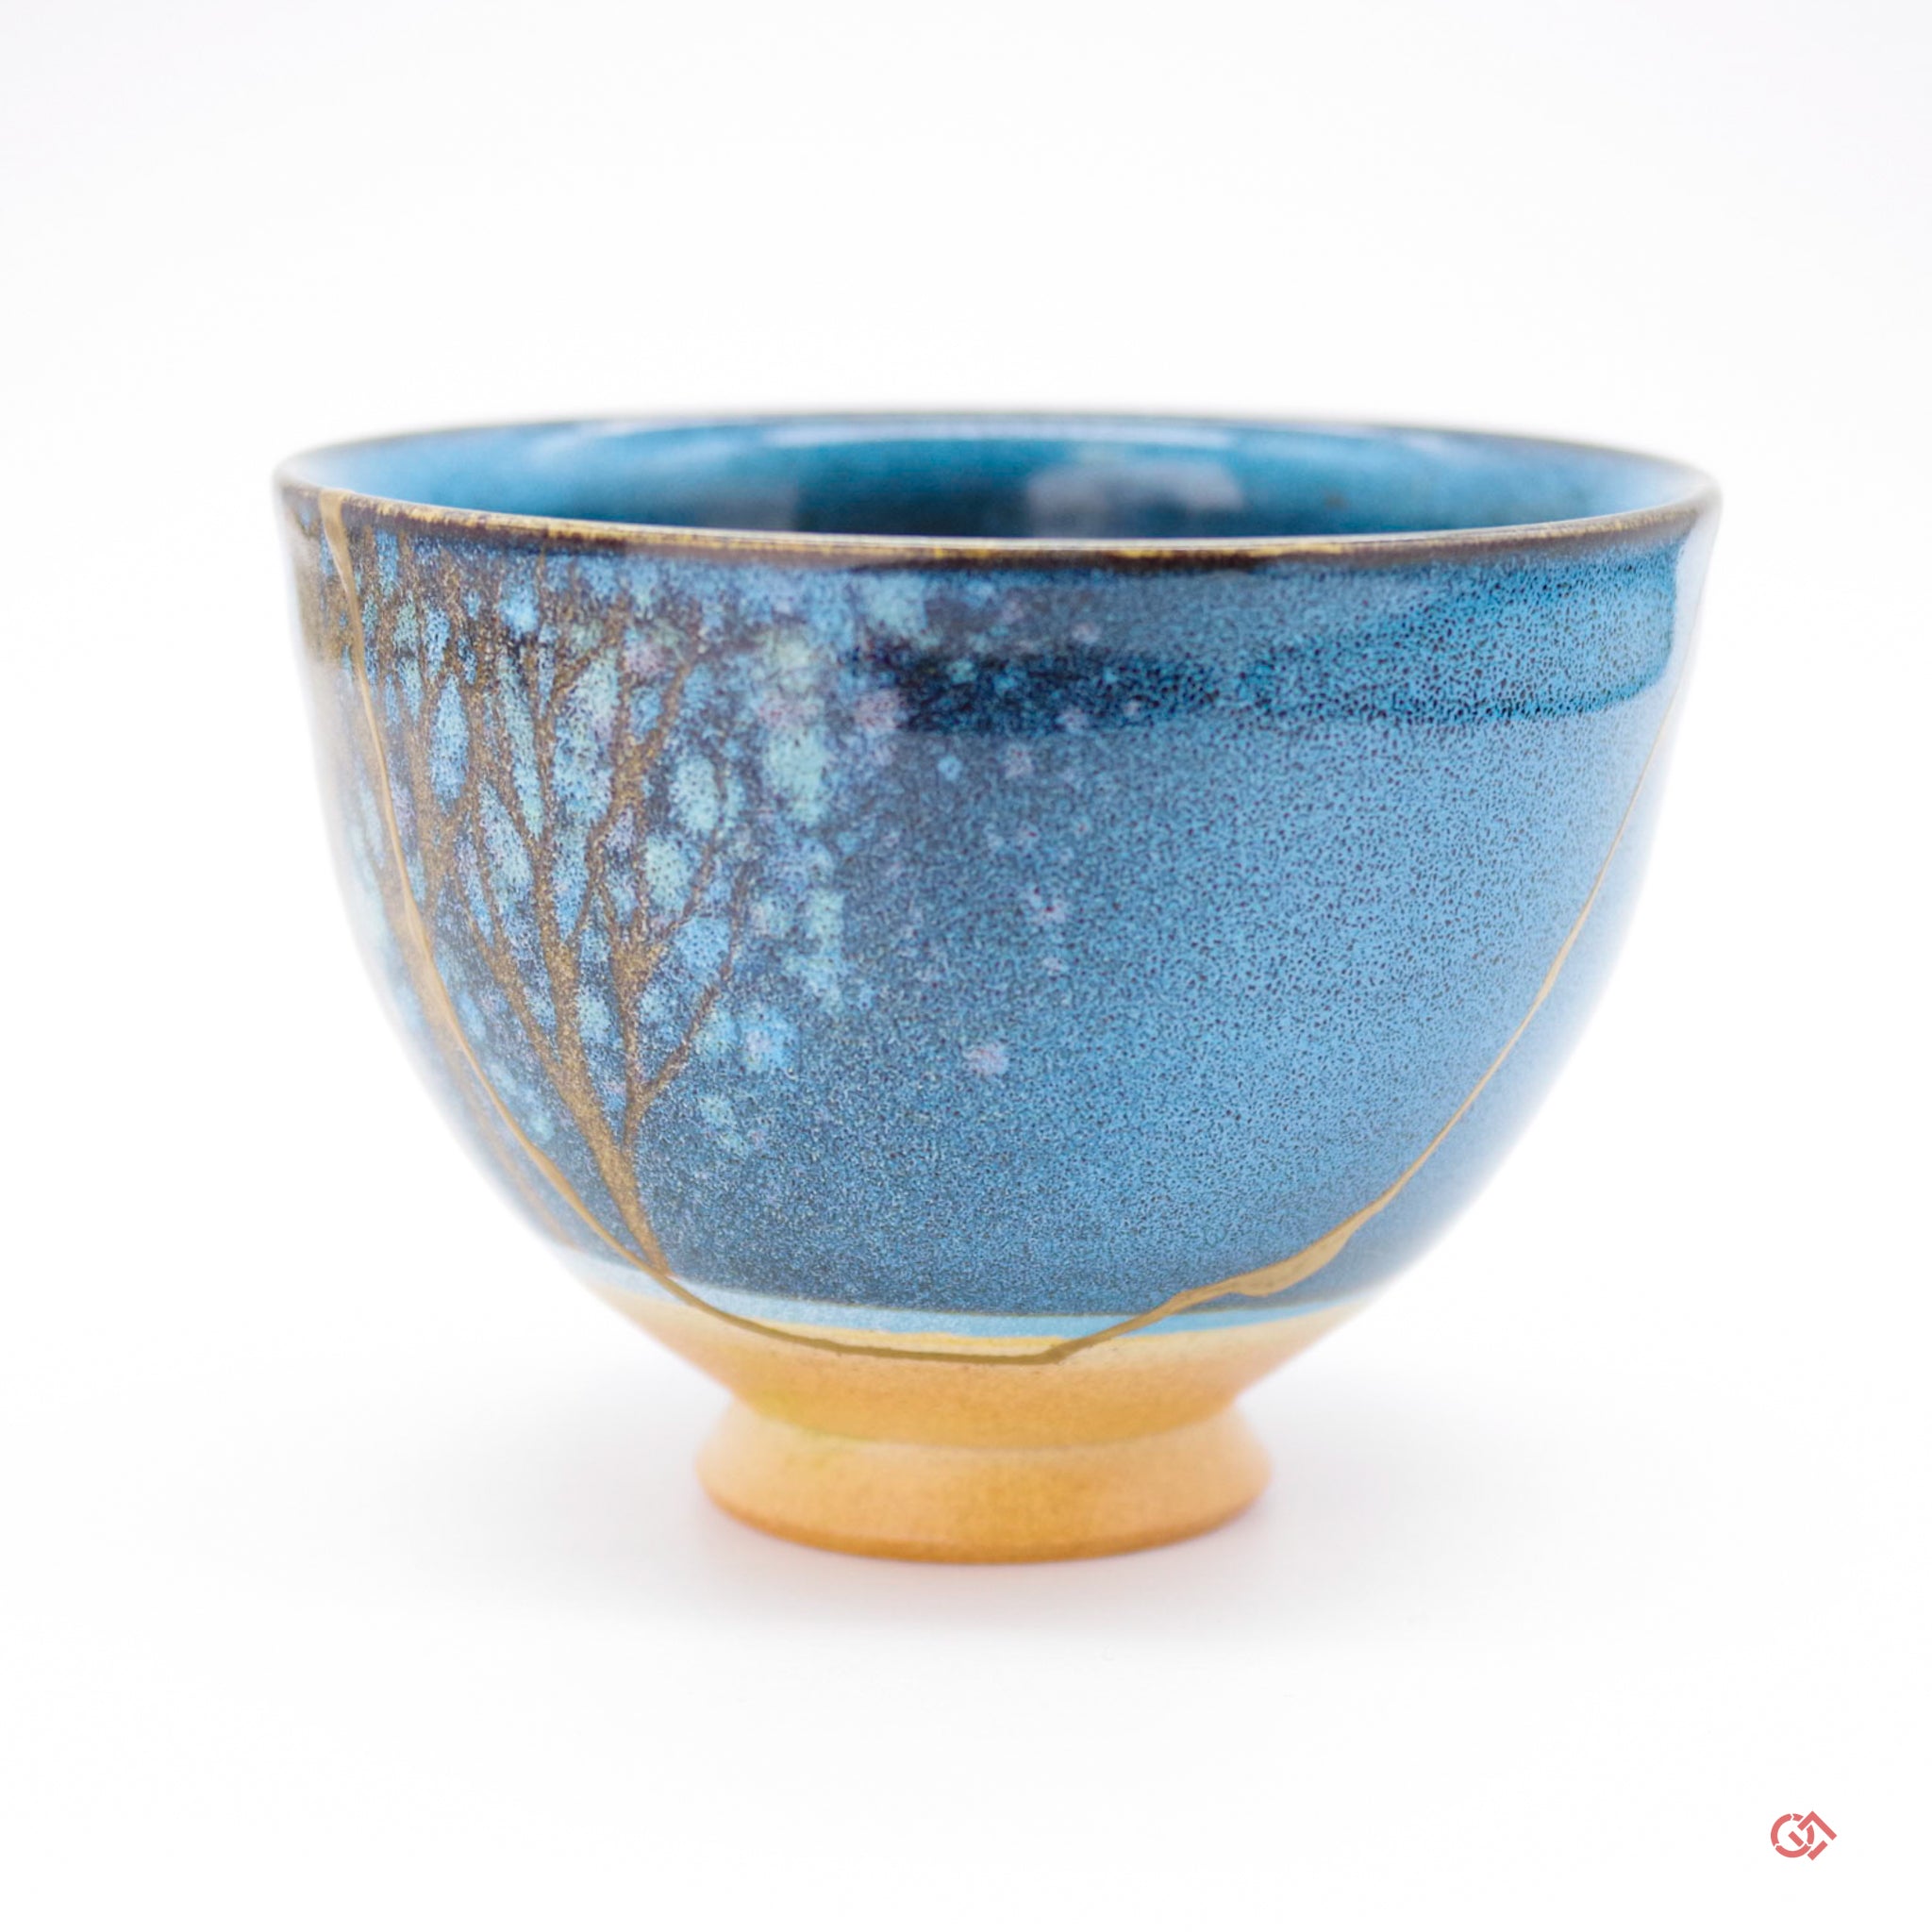  Youkoya Authentic 24k Kintsugi Bowl - Hand-Crafted in